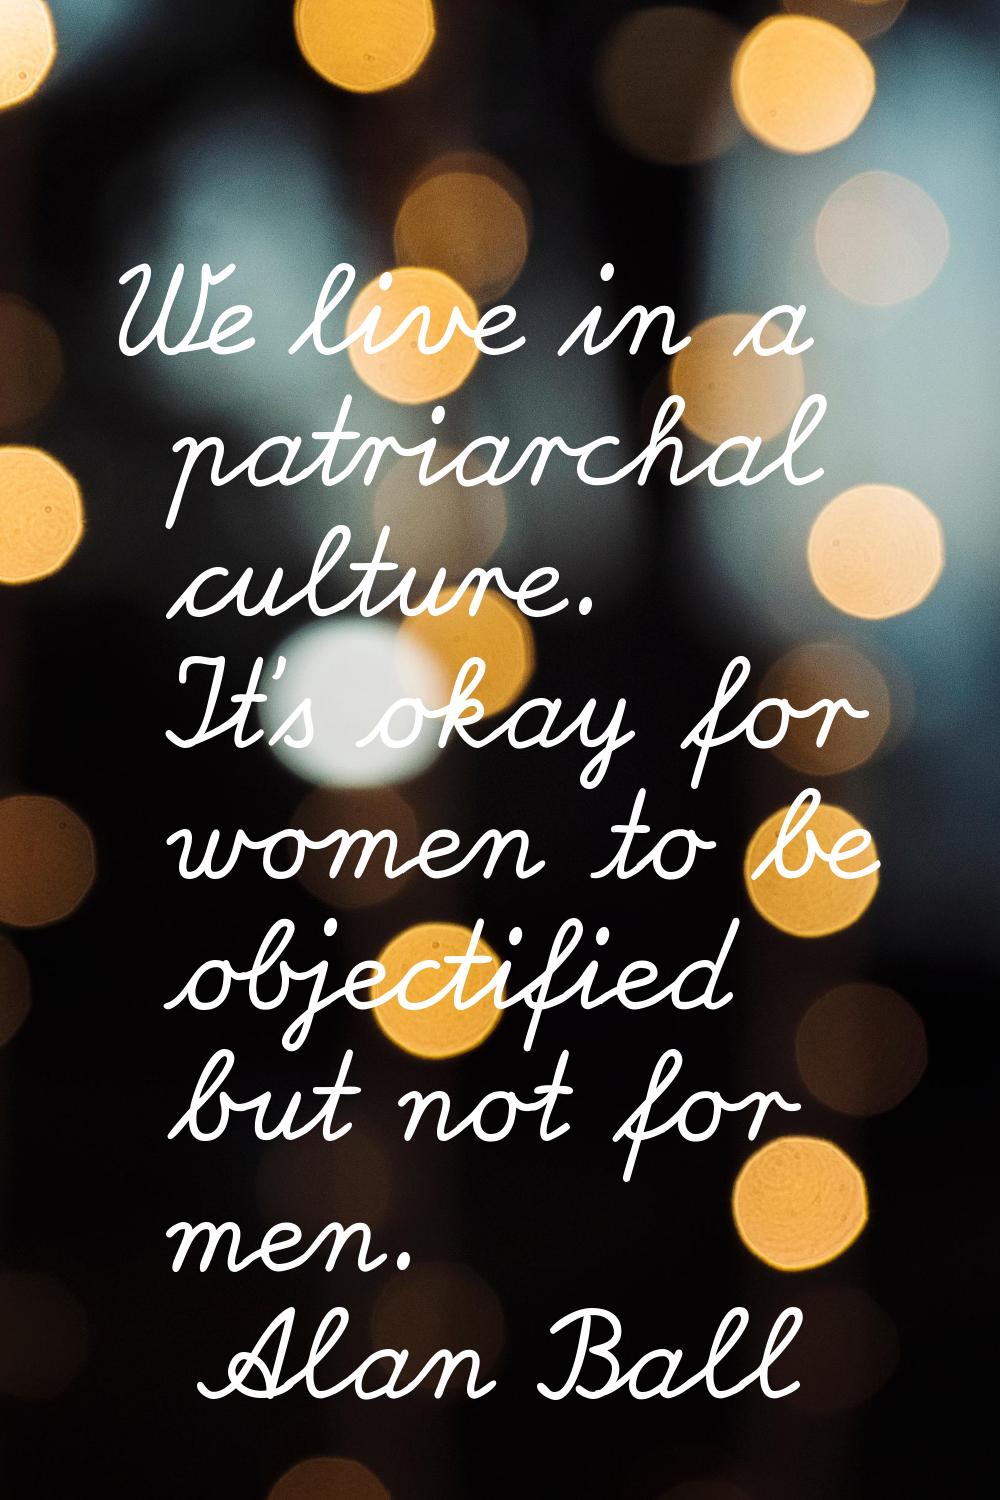 We live in a patriarchal culture. It's okay for women to be objectified but not for men.